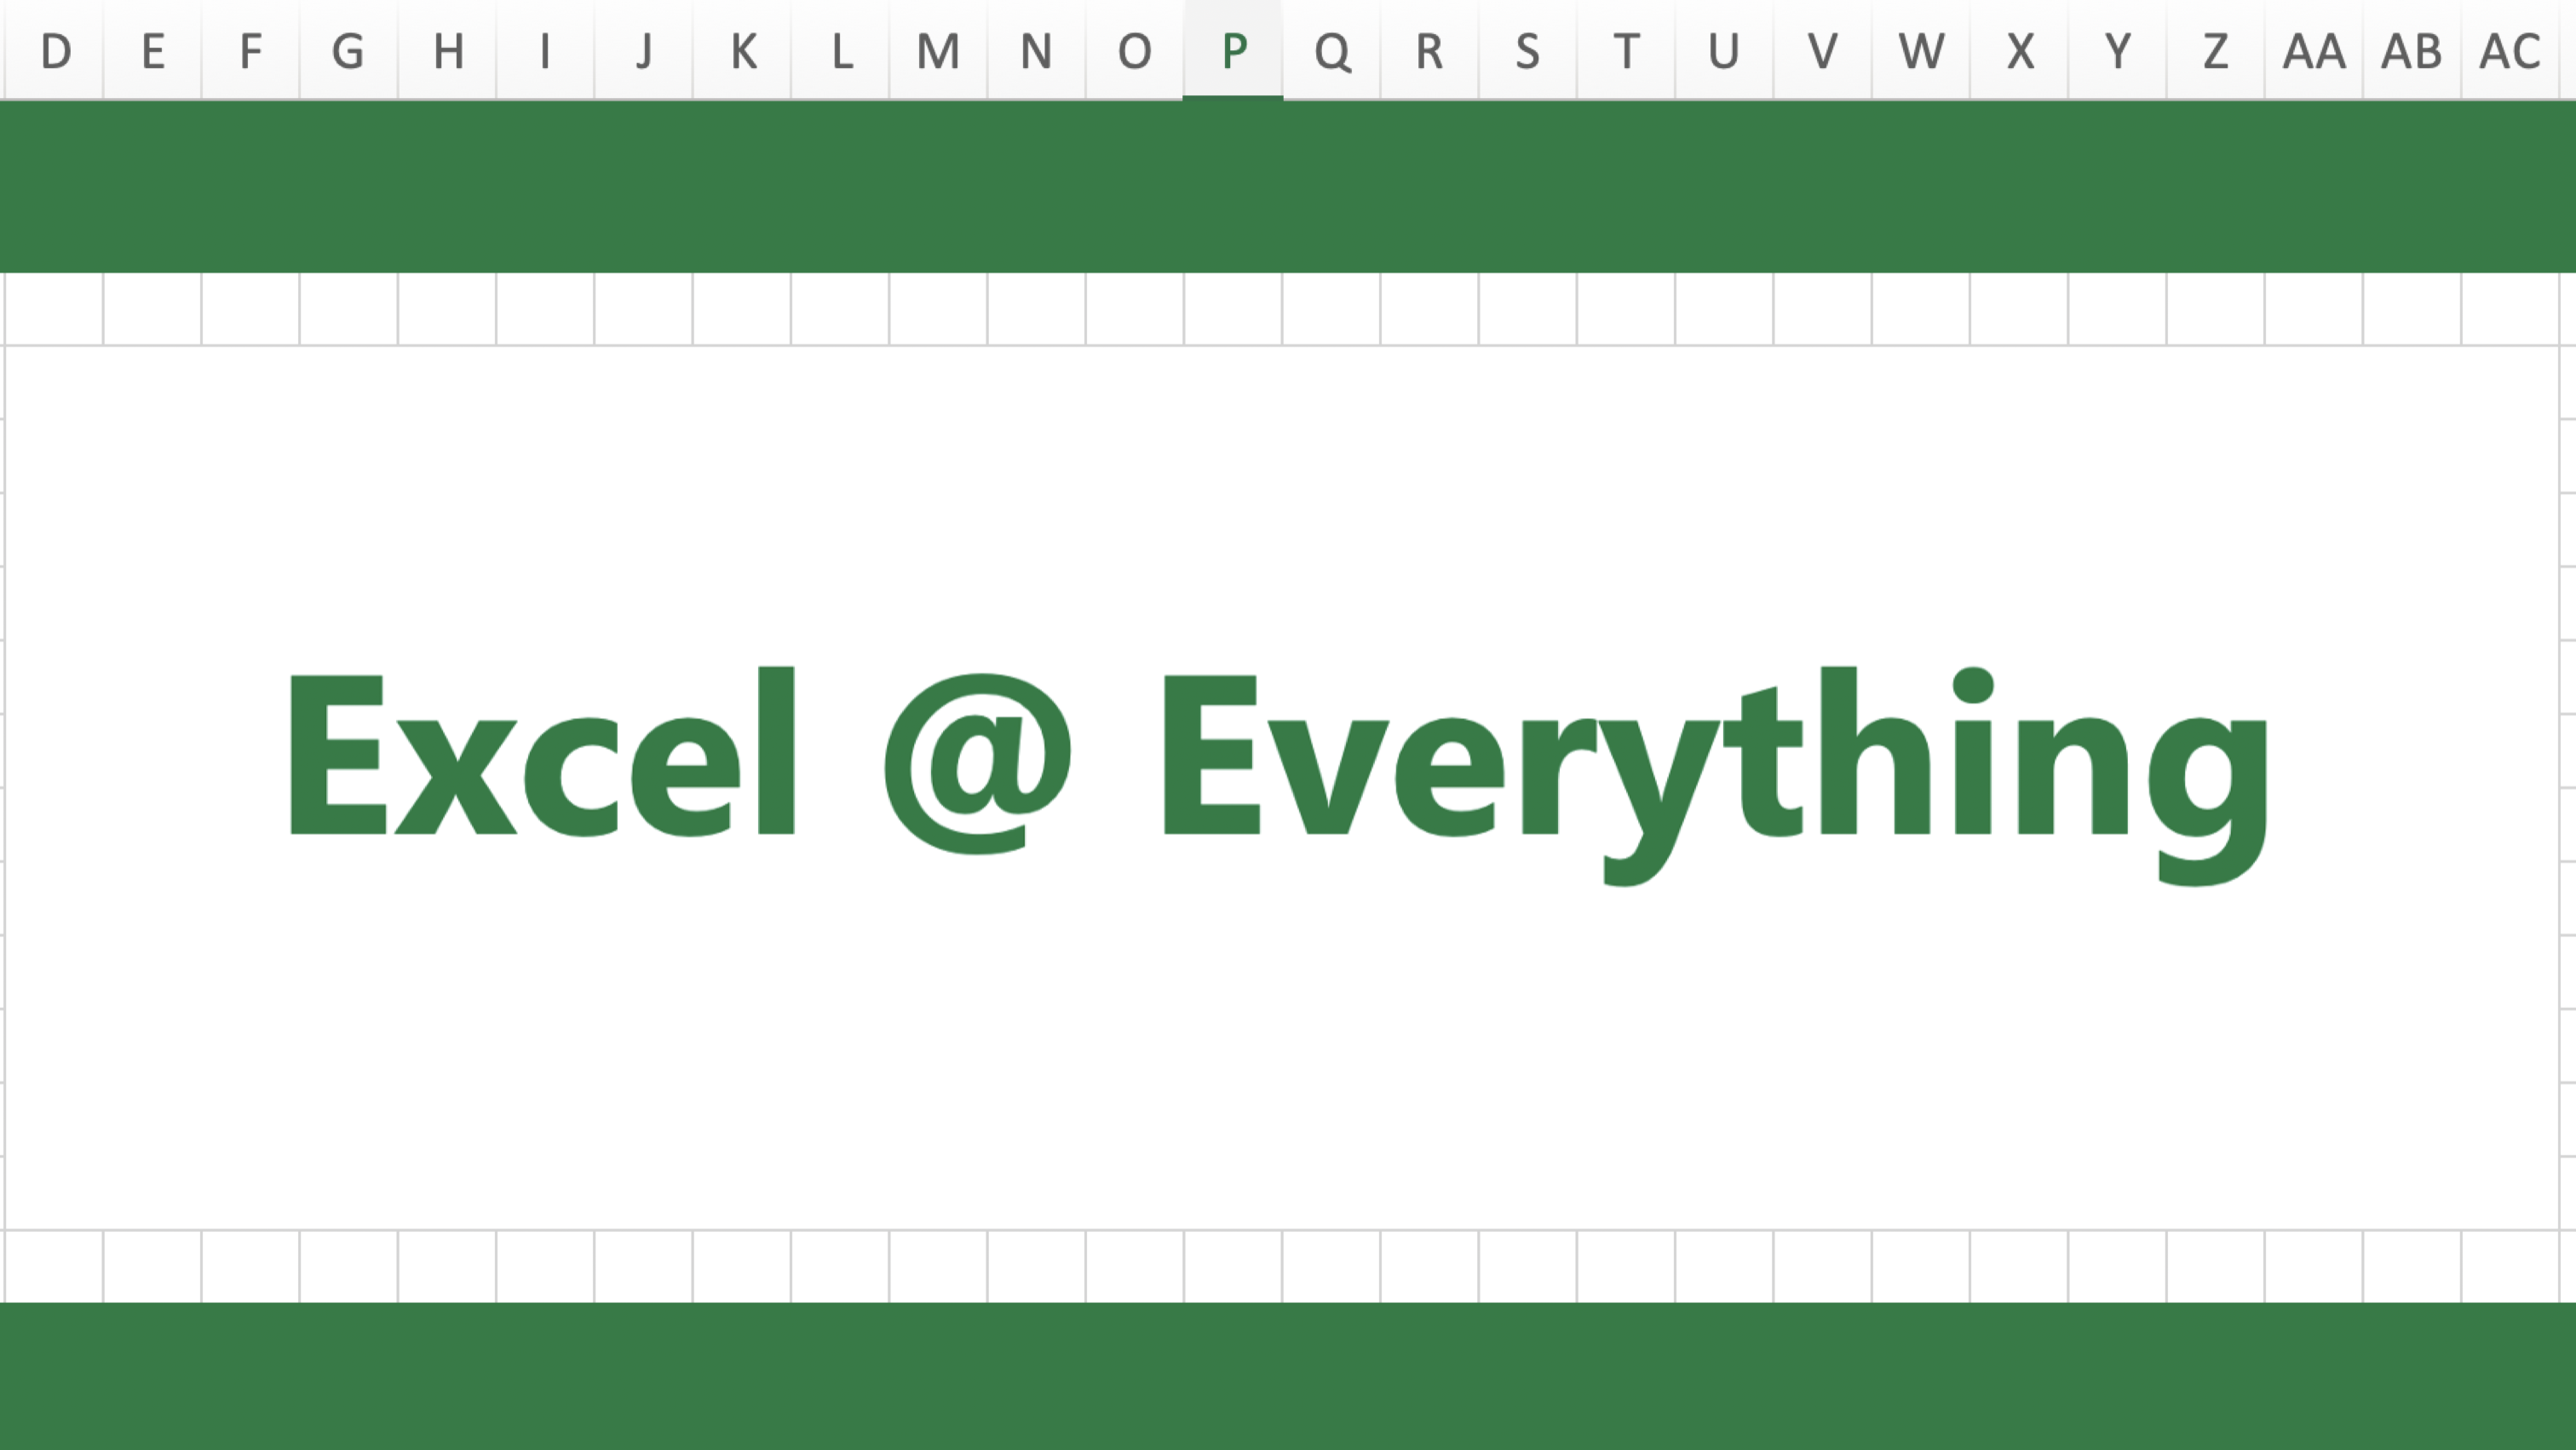 Excel spreadsheet with large green text that reads Excel @ Everything